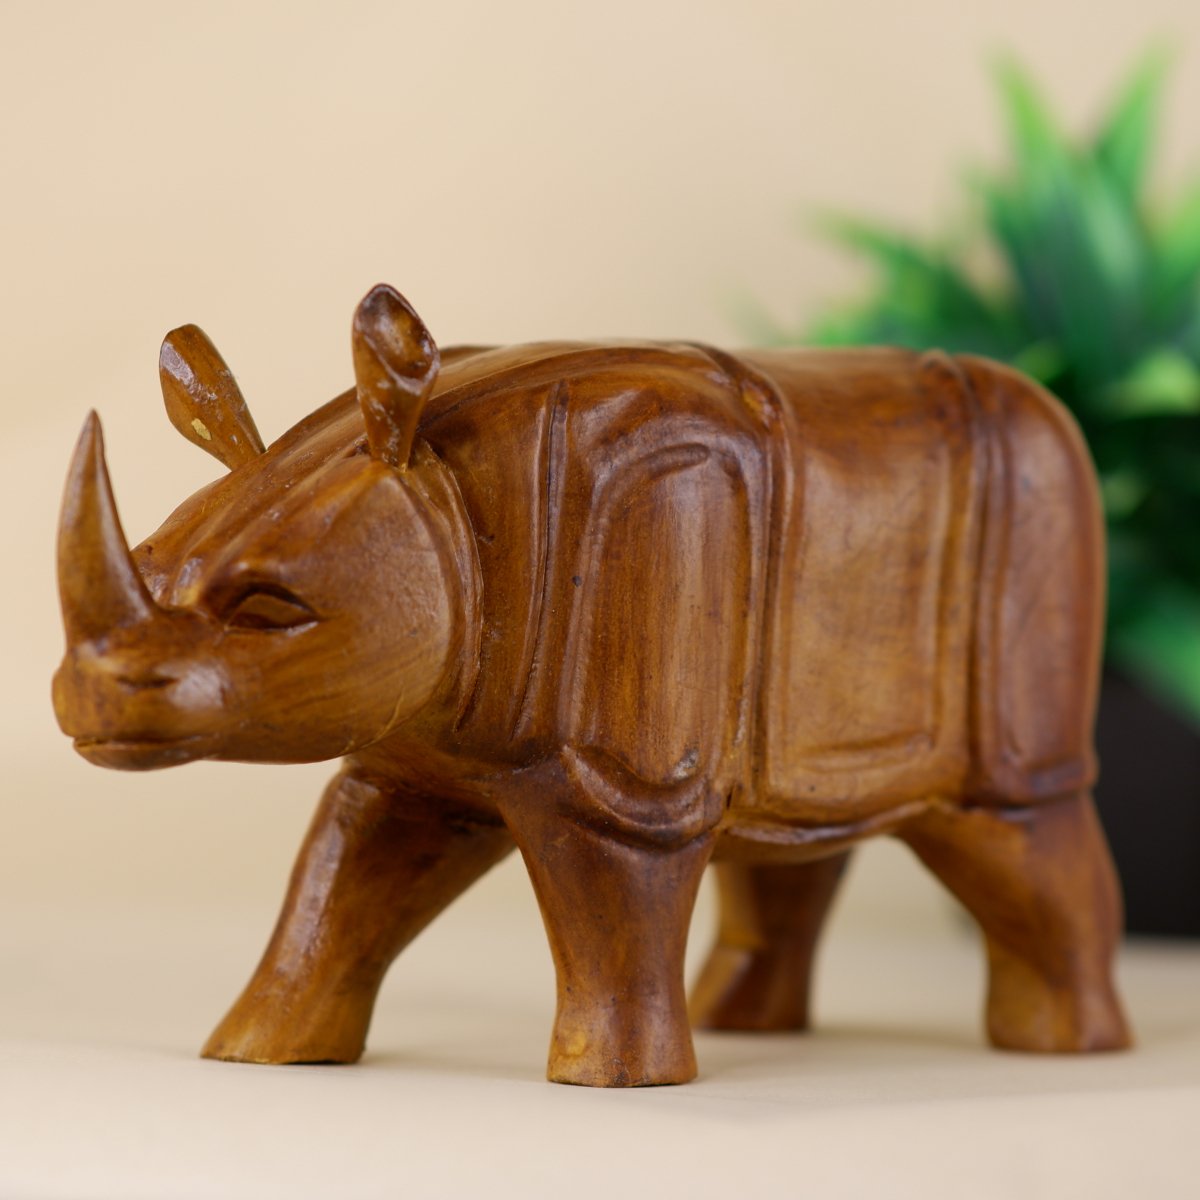 Artistic Wooden Carved Rhino Sculpture -Wooden-Sowpeace-Artistic Wooden Carved Rhino Sculpture -Wooden-Sowpeace-Artistic Wooden Carved Rhino Sculpture-Wood-WRHN-WDN-TT-Sowpeace-Wood-WRHN-WDN-TT-Sowpeace